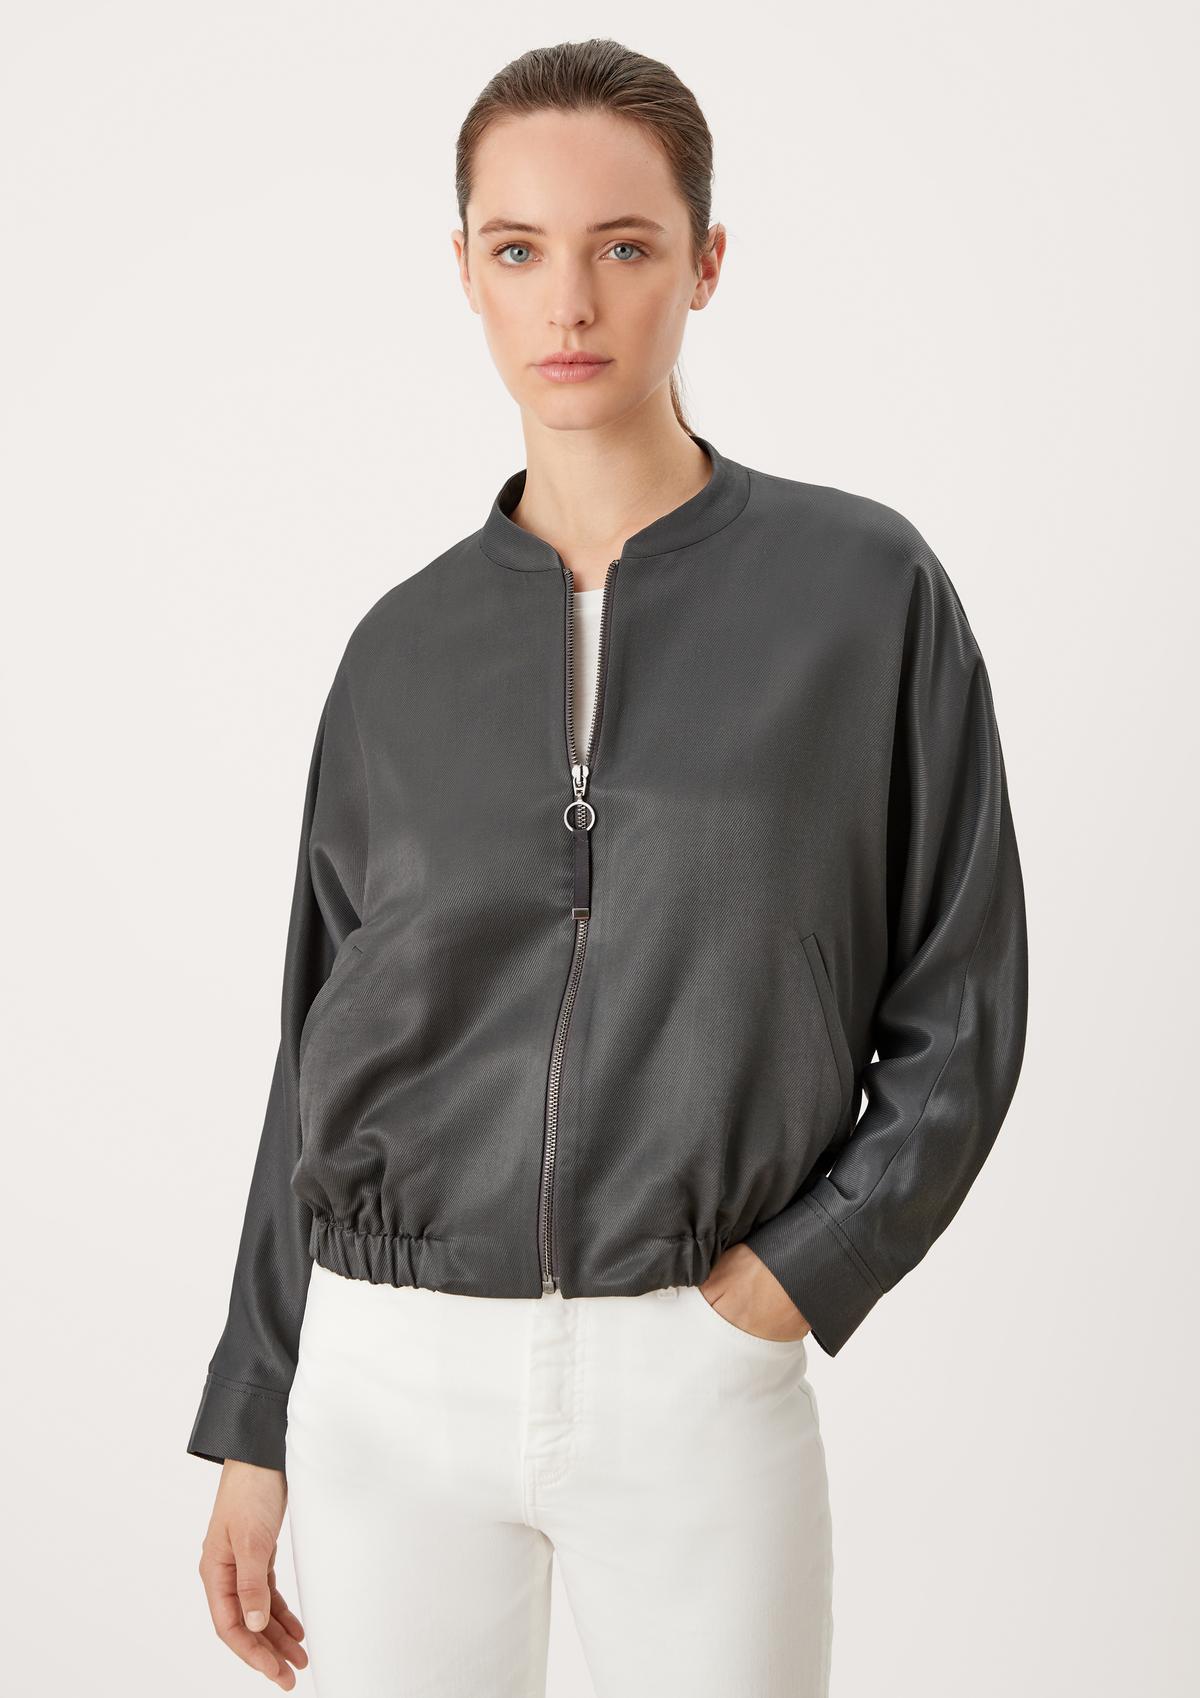 Bomber jacket with a twill texture